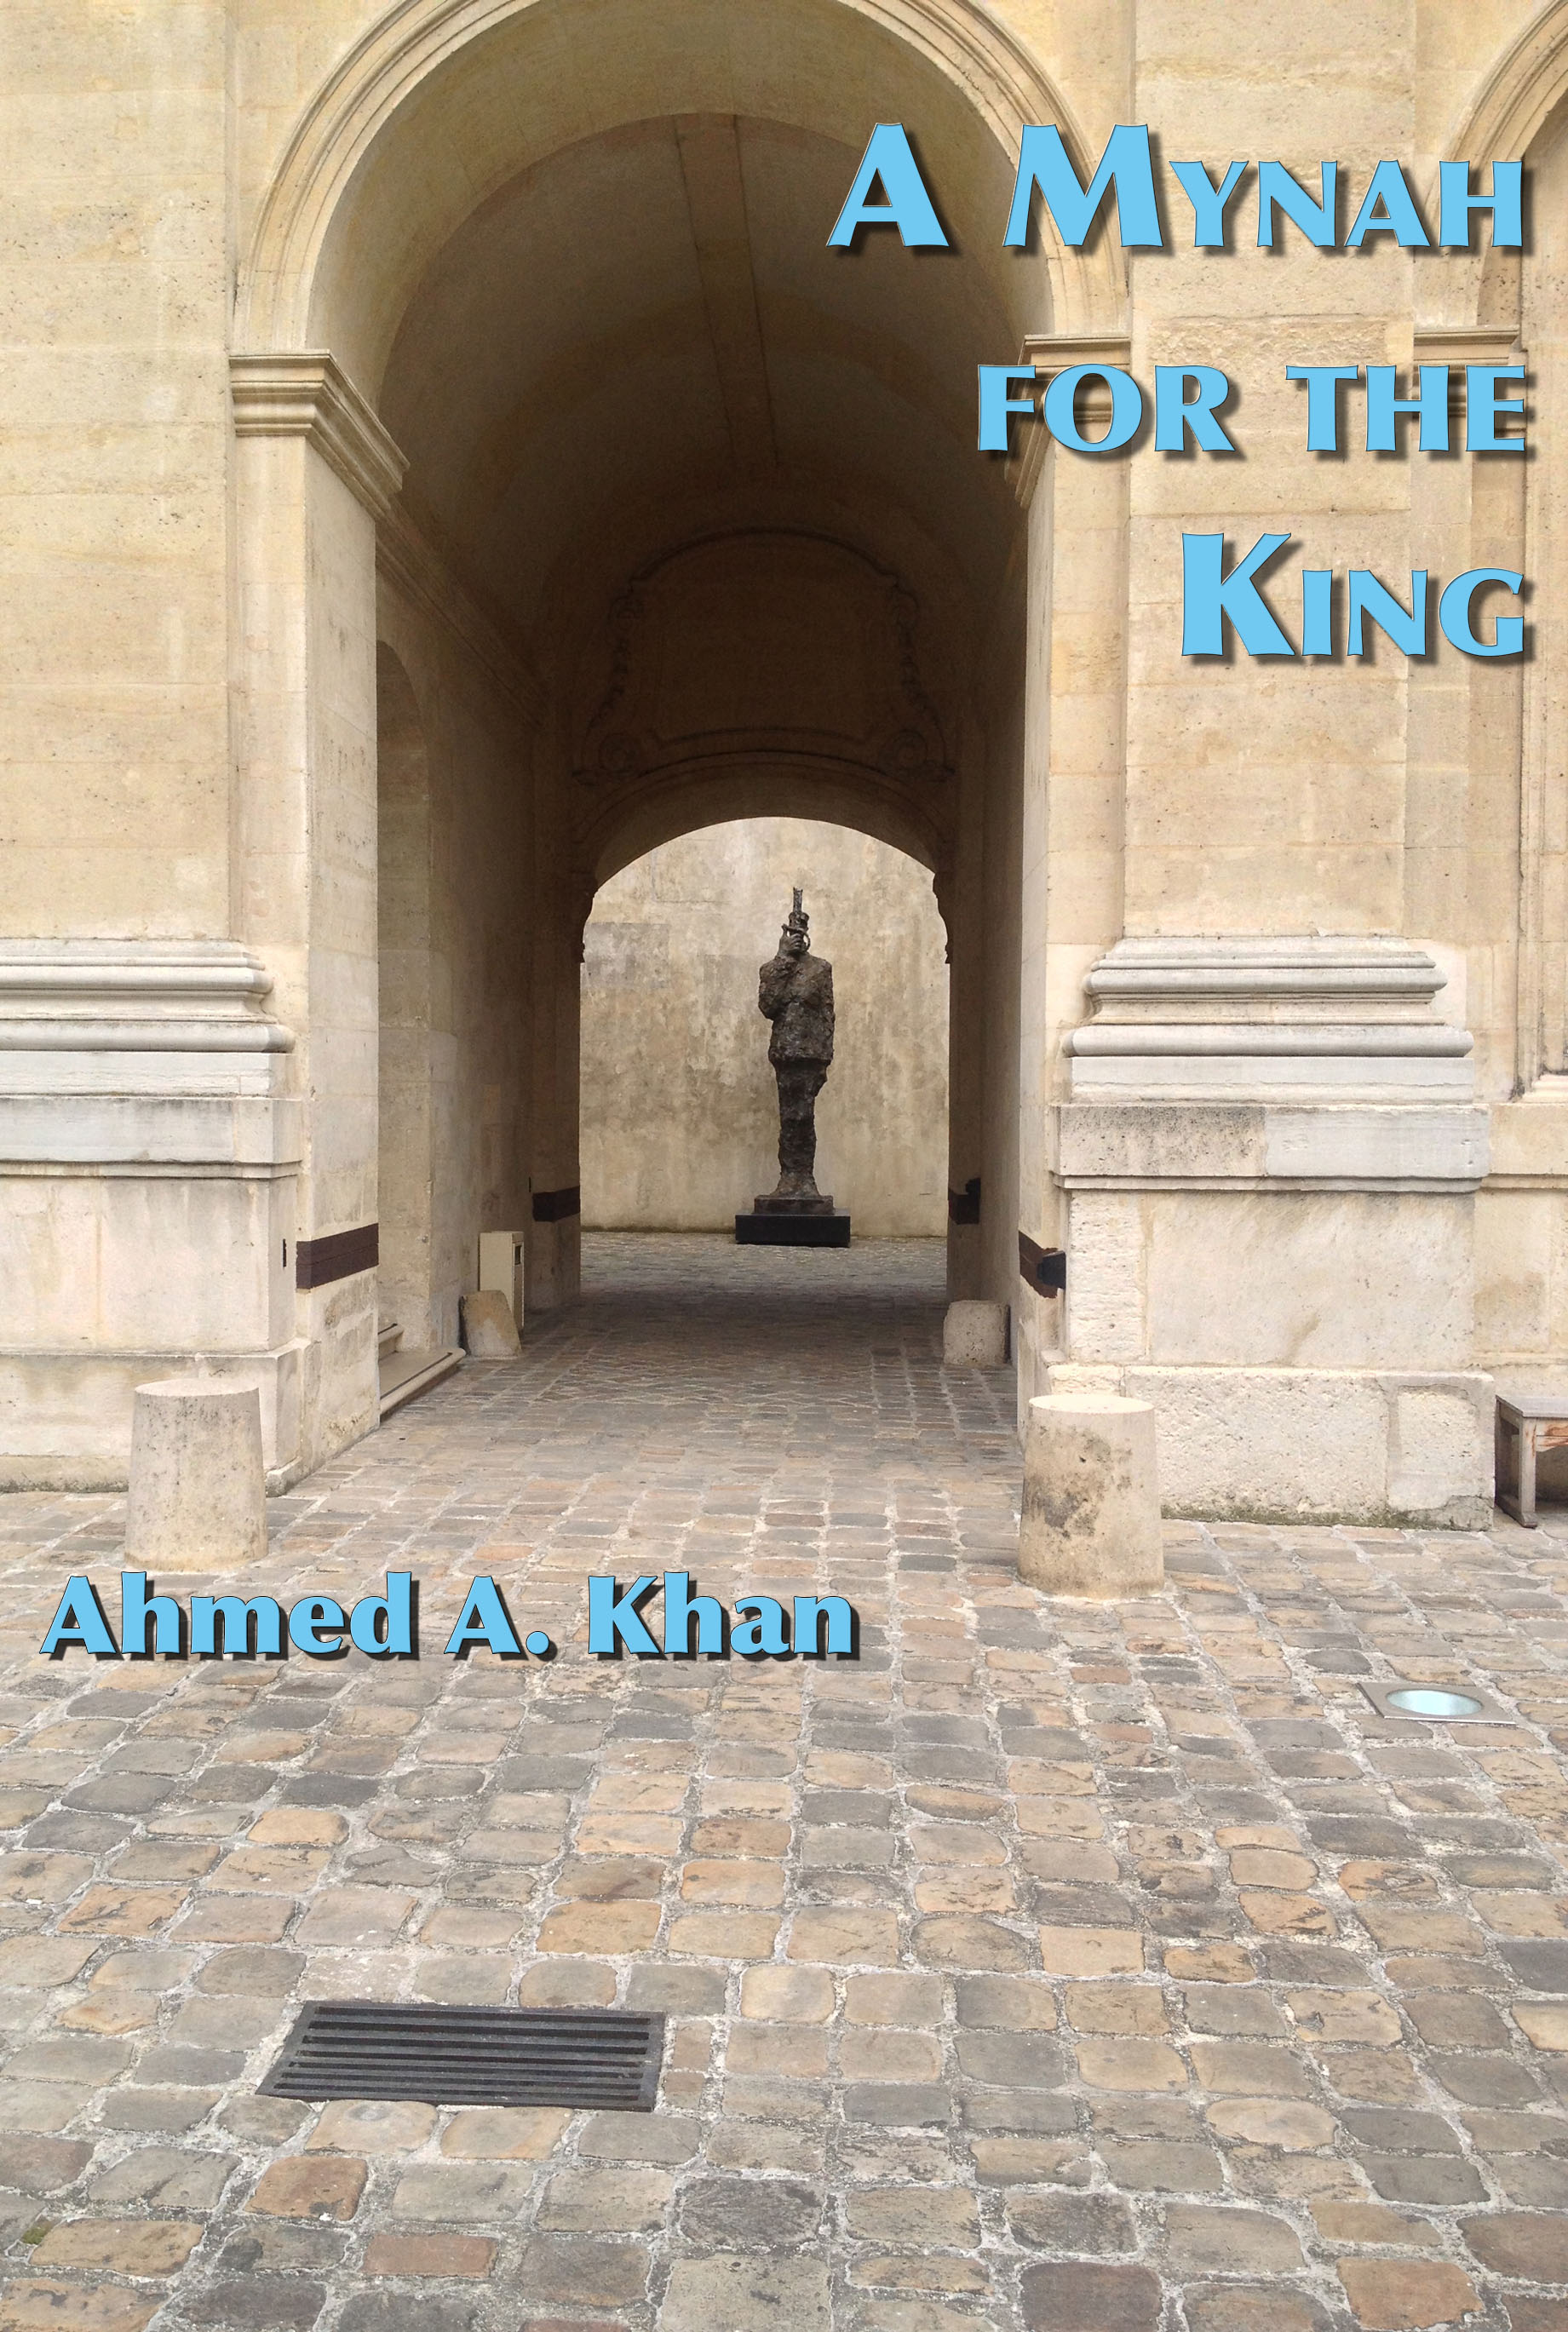 A Mynah for the King, by Ahmed A. Khan